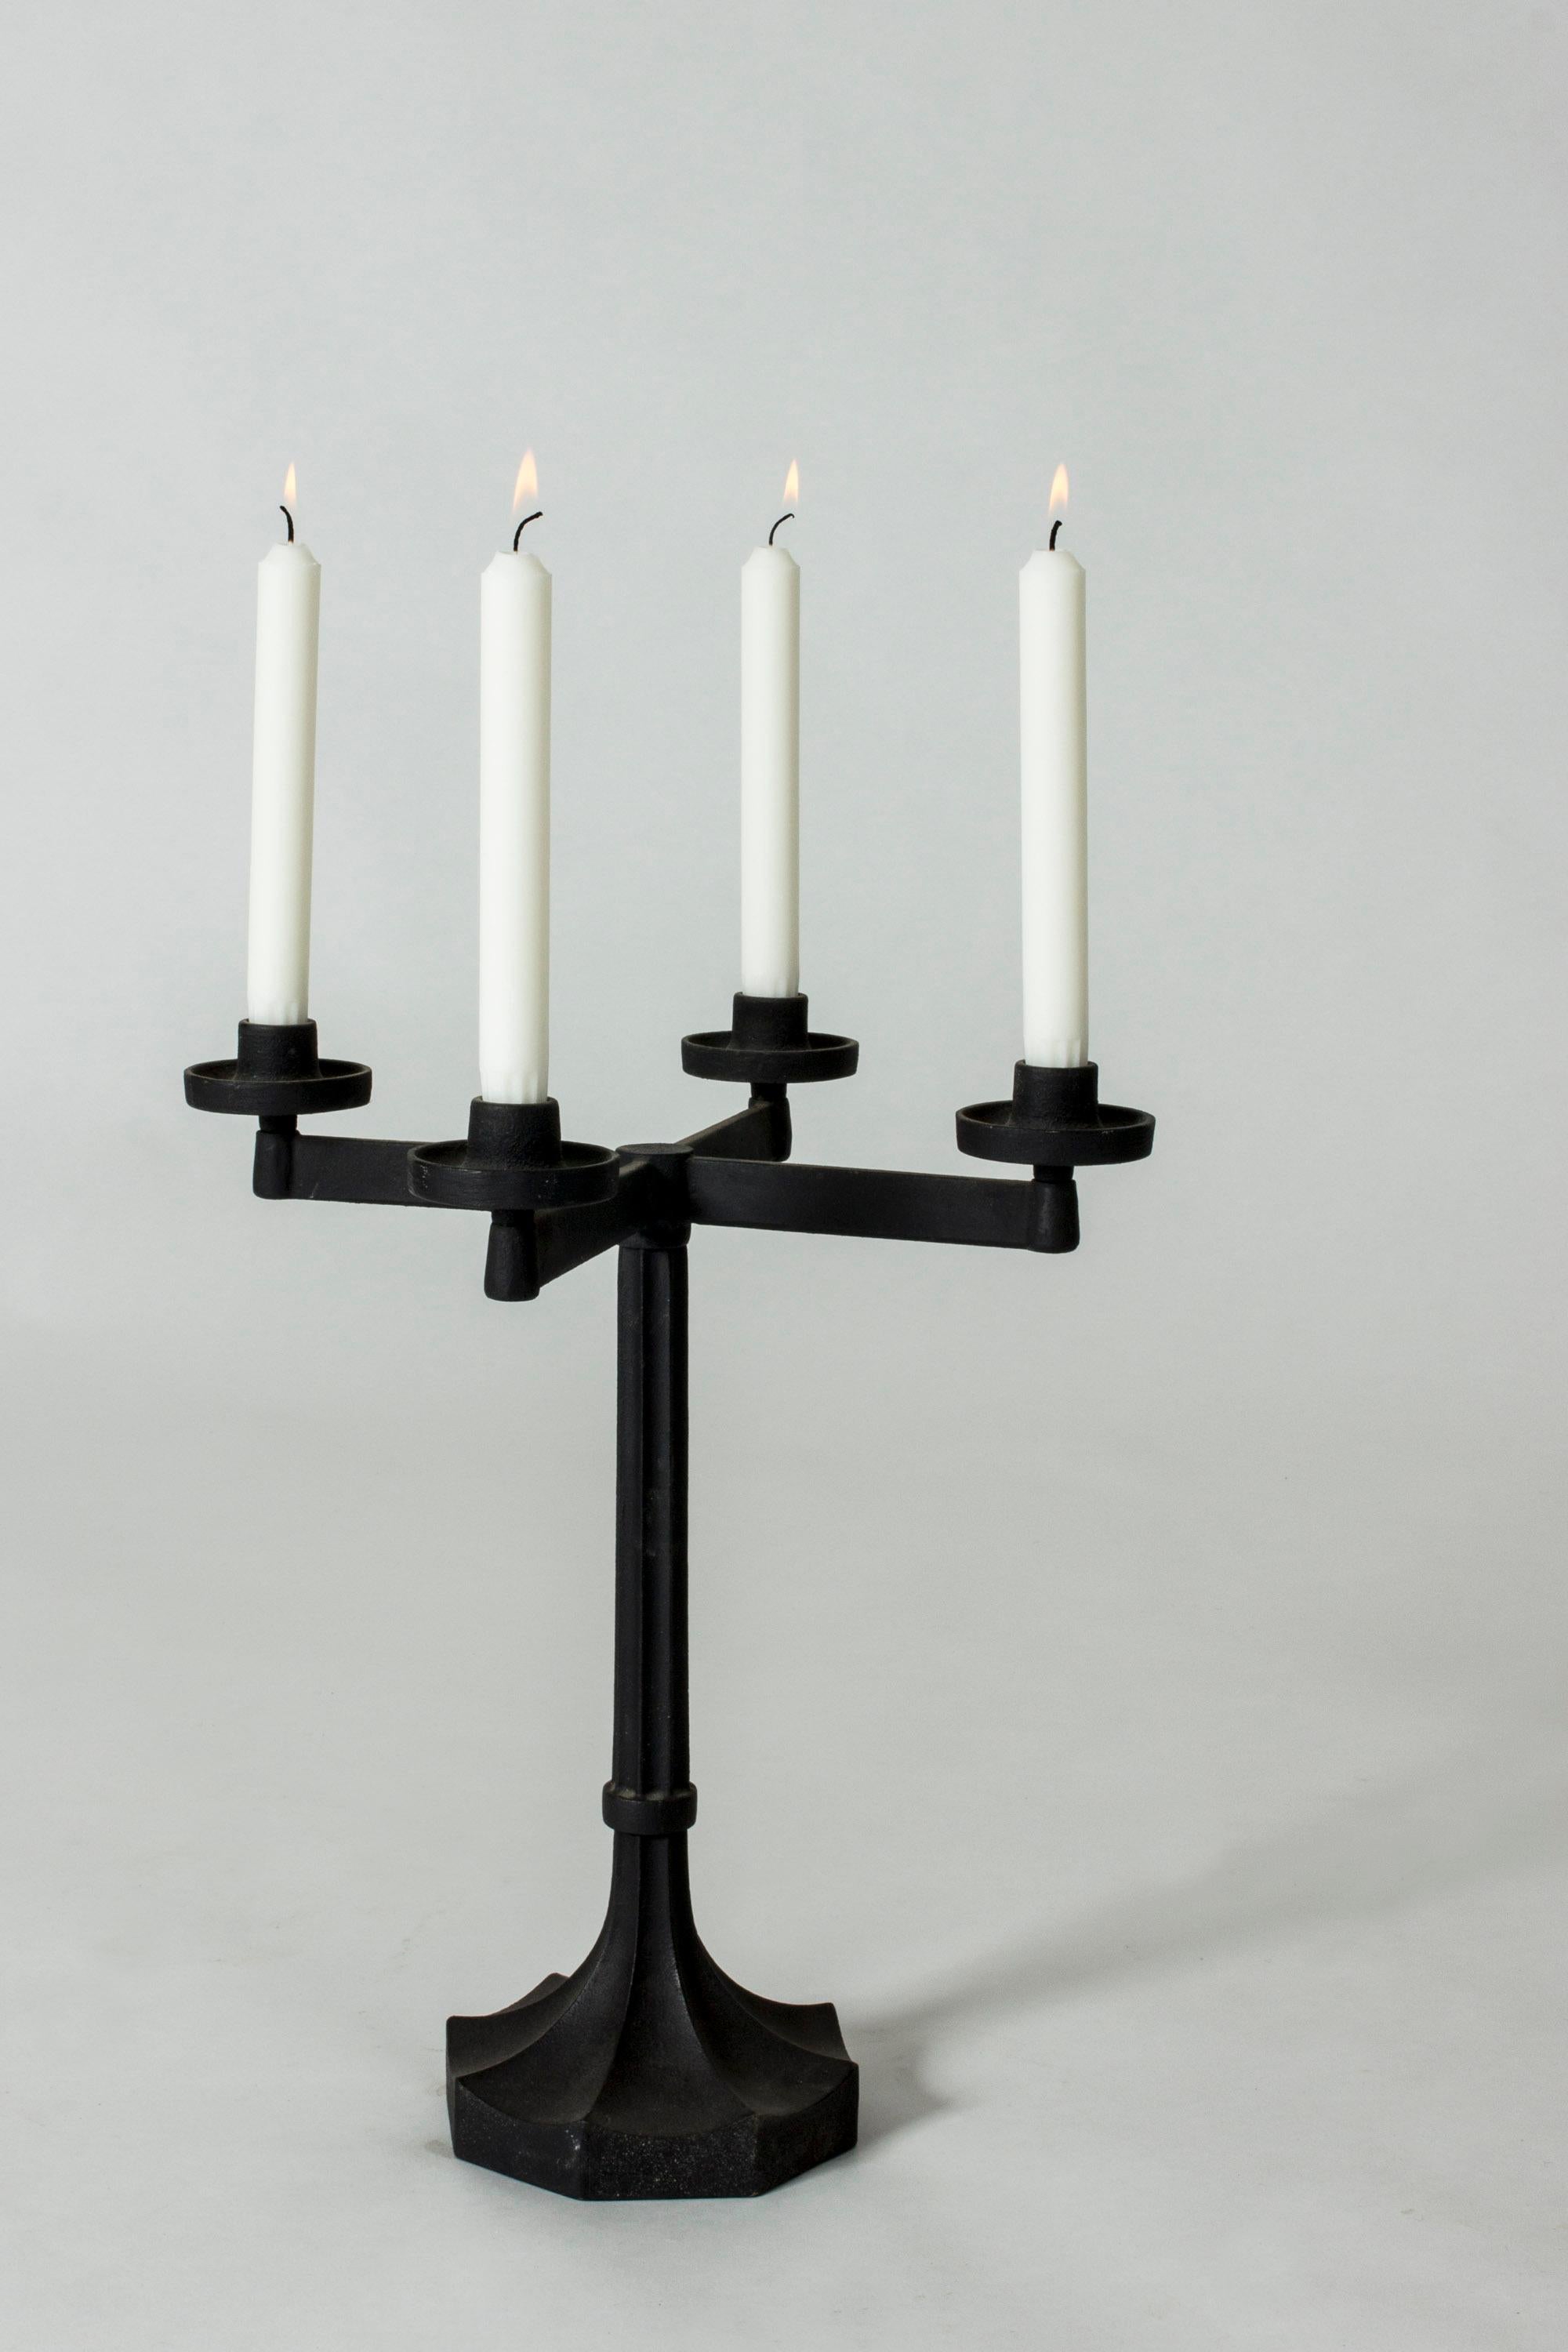 Pair of imposing cast iron candelabras by Sigurd Persson. Made in a cool, distinct design with four candleholders in each.
Price is for the pair.